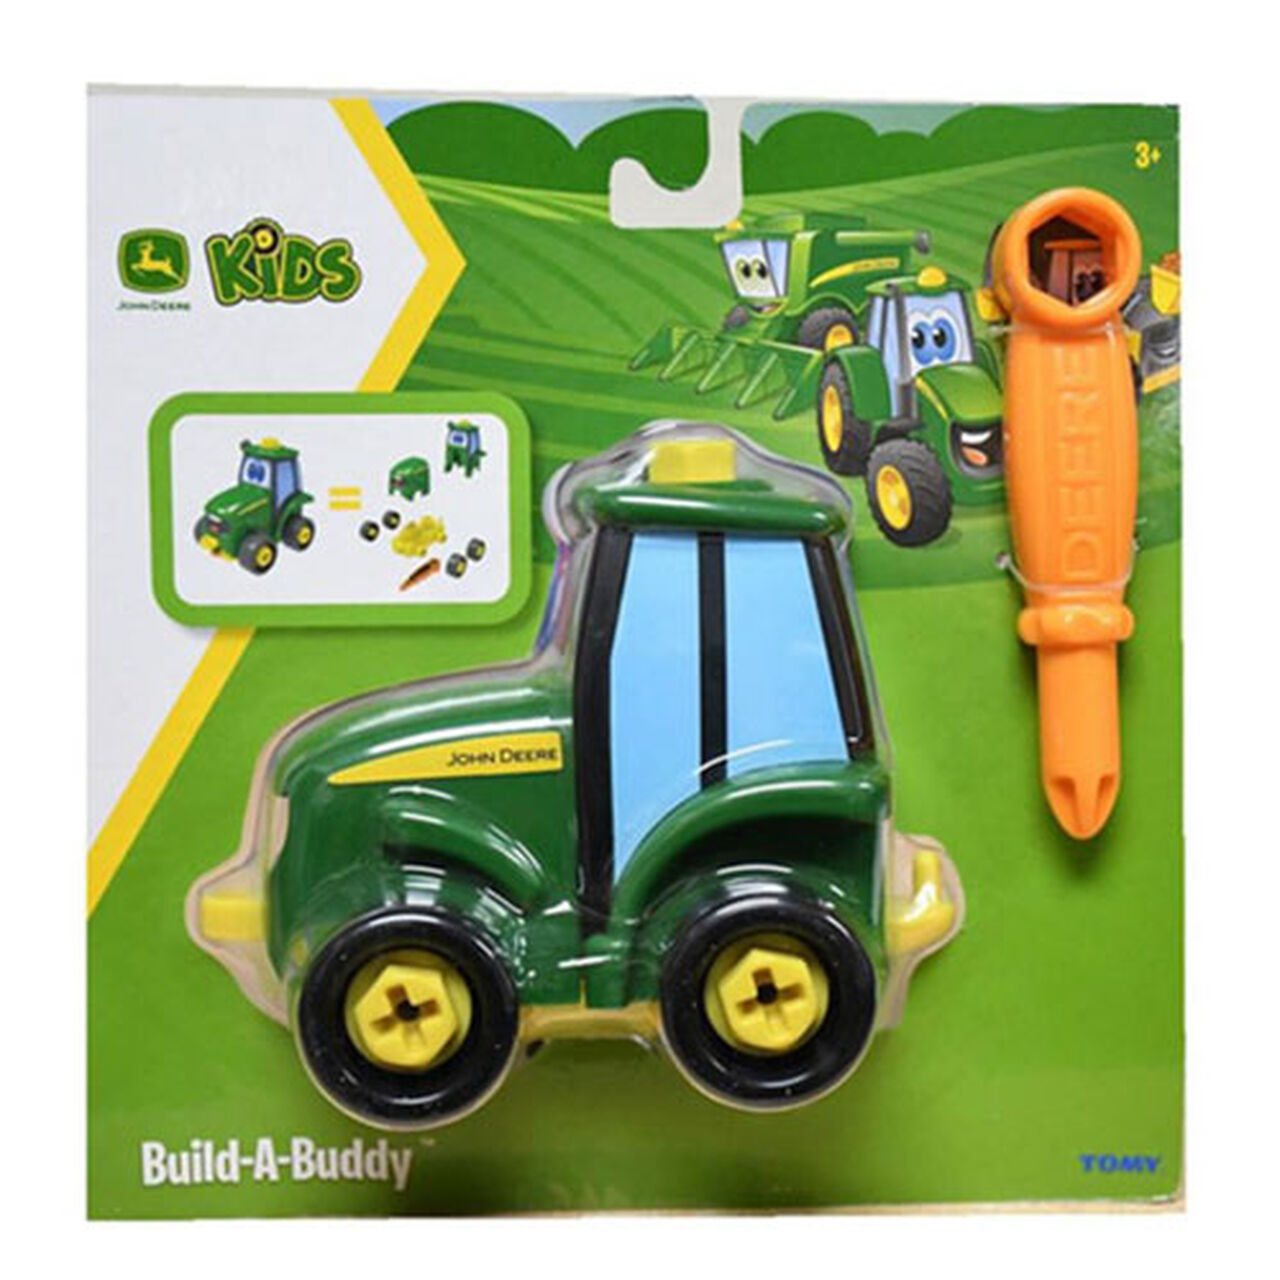 Build-A-Buddy Johnny Tractor LP73810,  image number 1